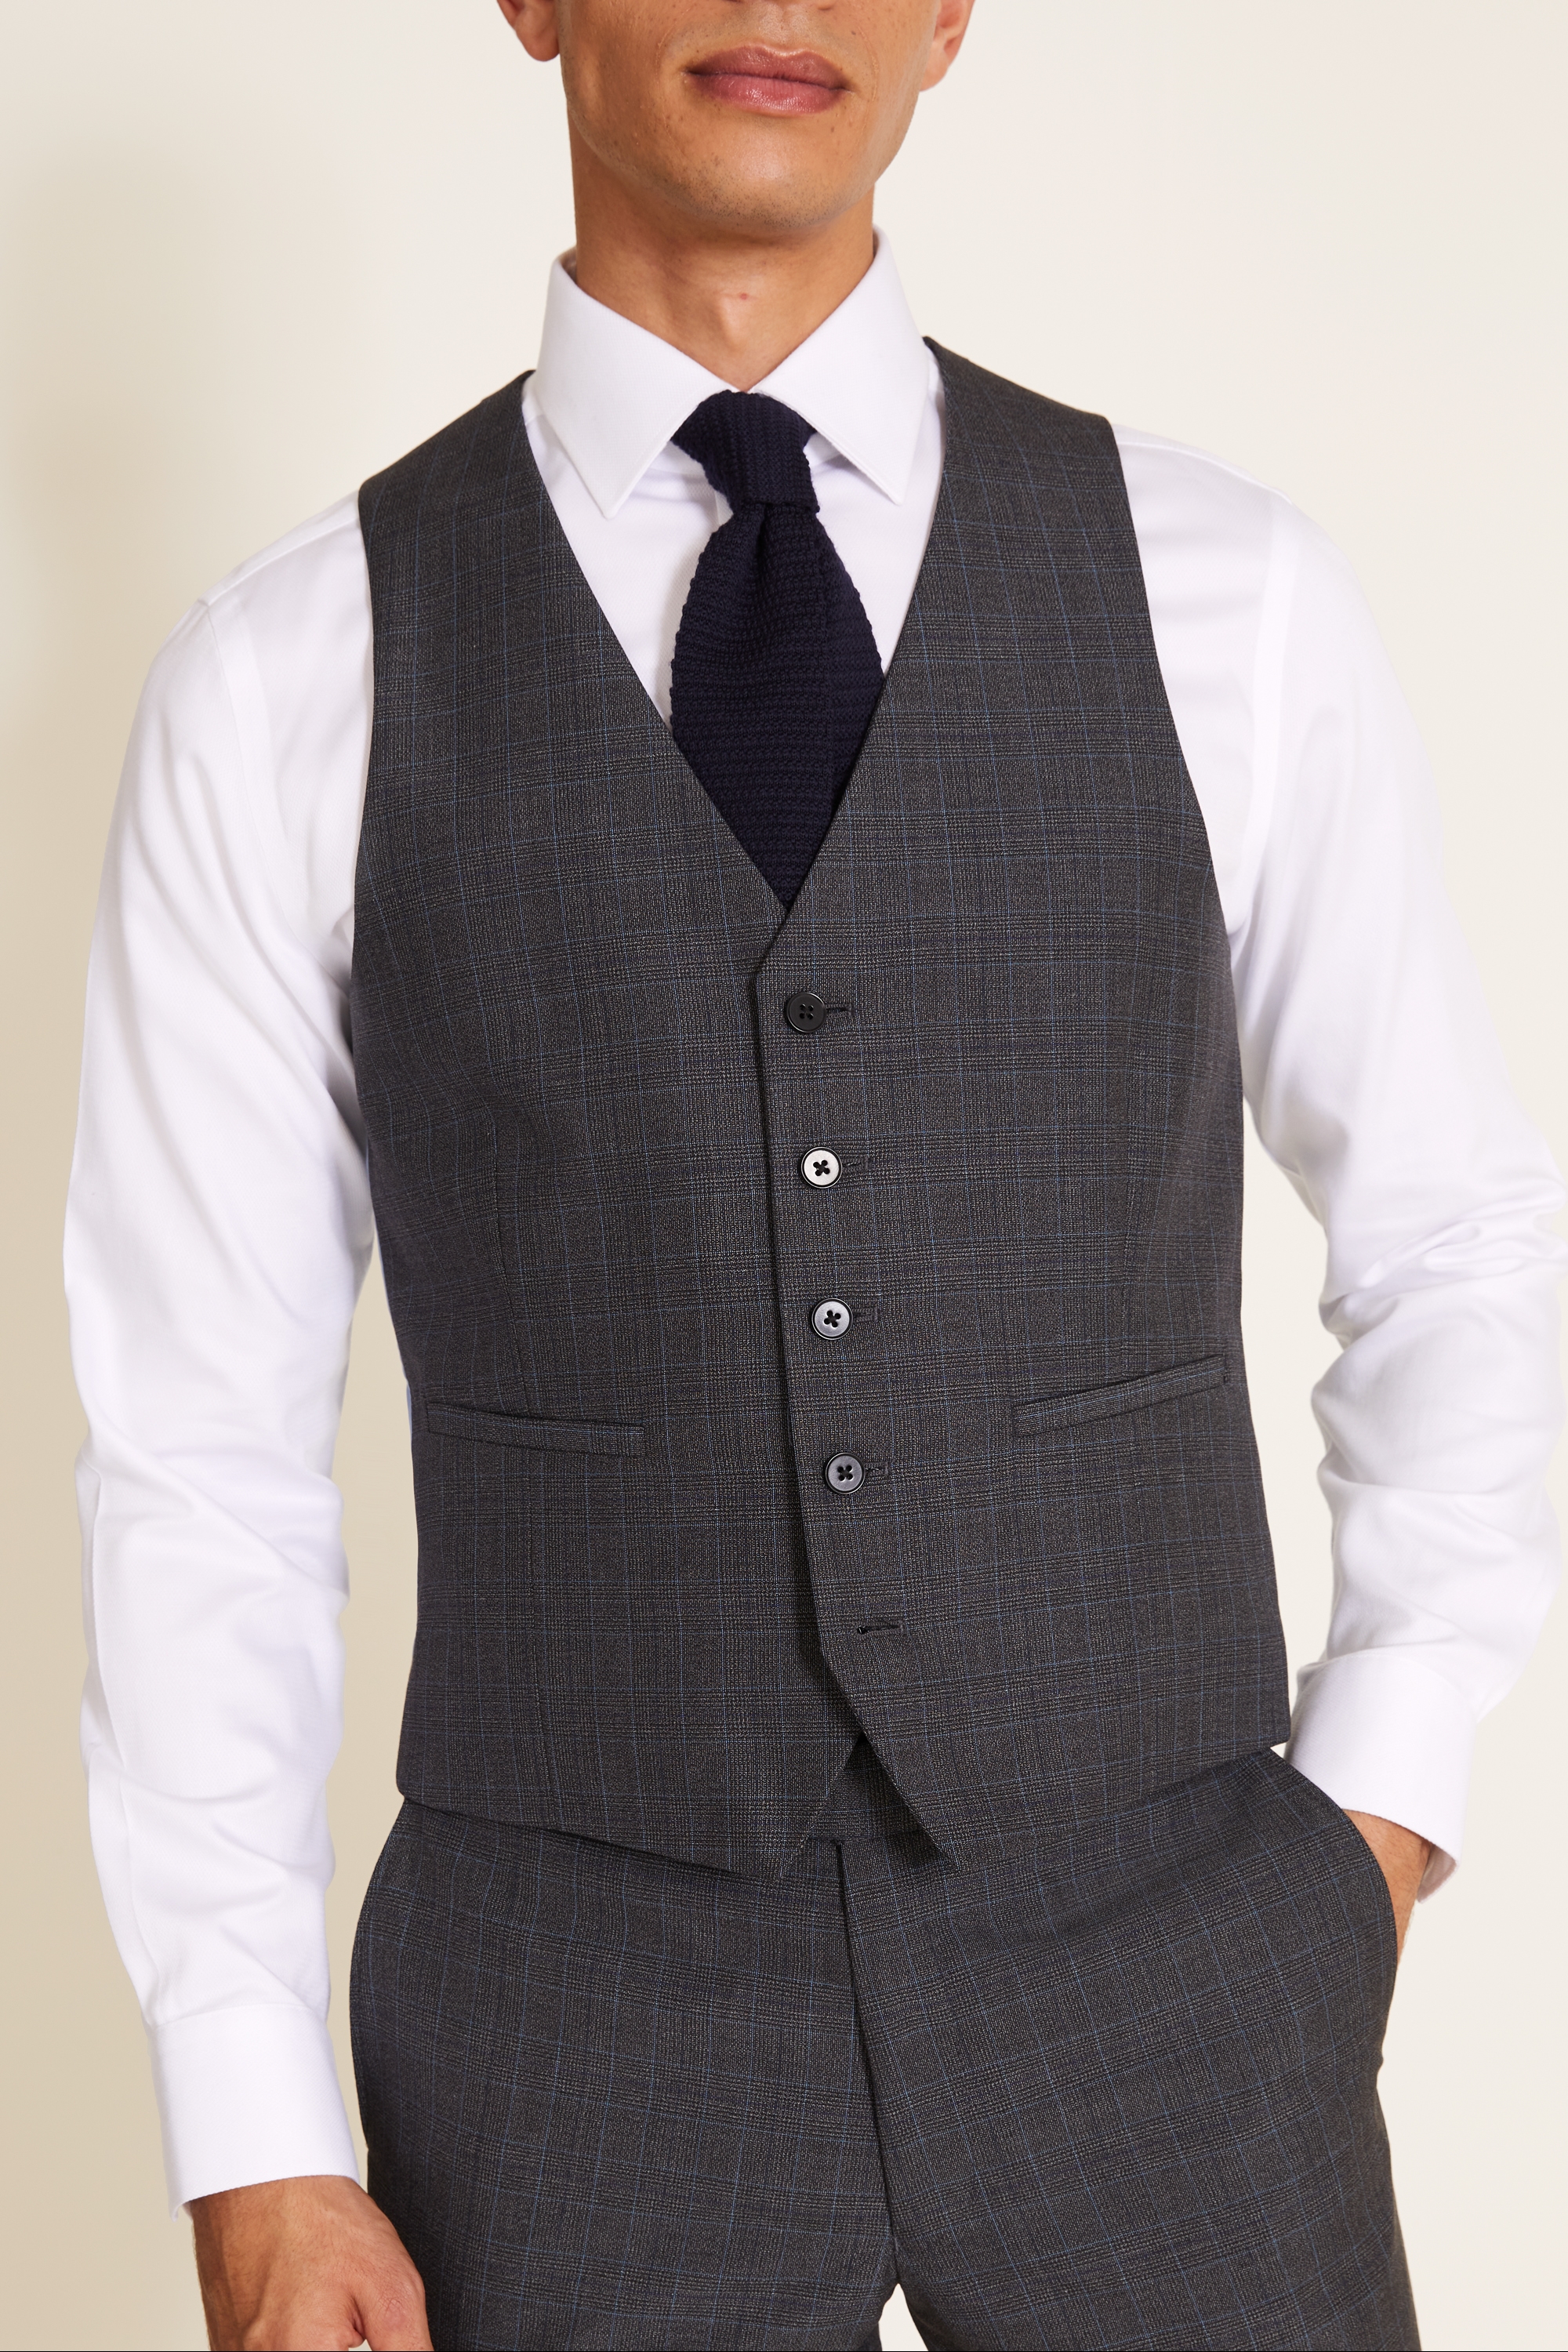 Slim Fit Charcoal Check Waistcoat | Buy Online at Moss